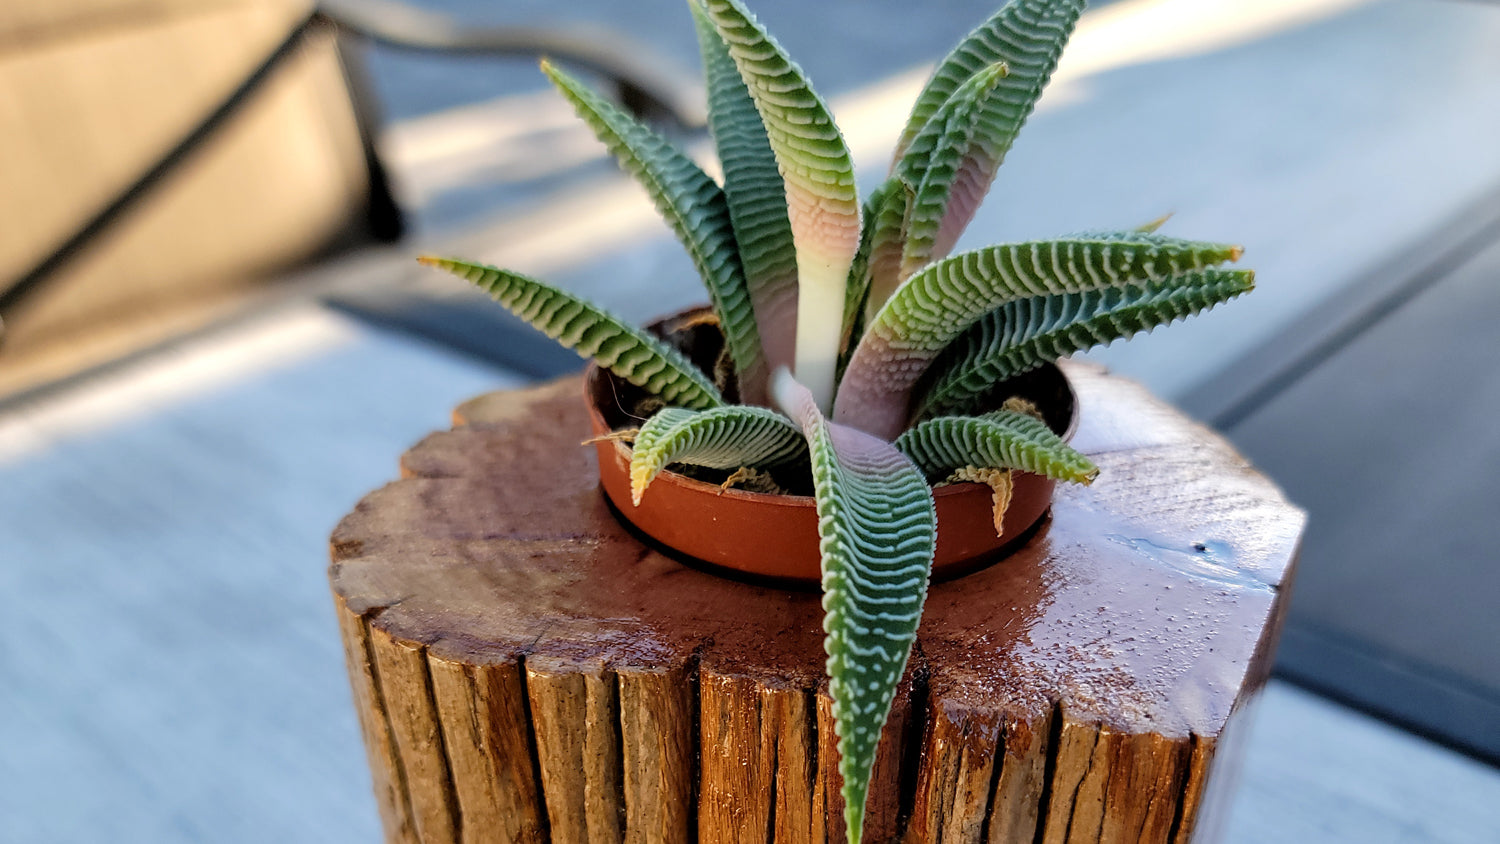 Handmade Planter Made From Stunning Cedar with Unique Knot Detail, Zoom